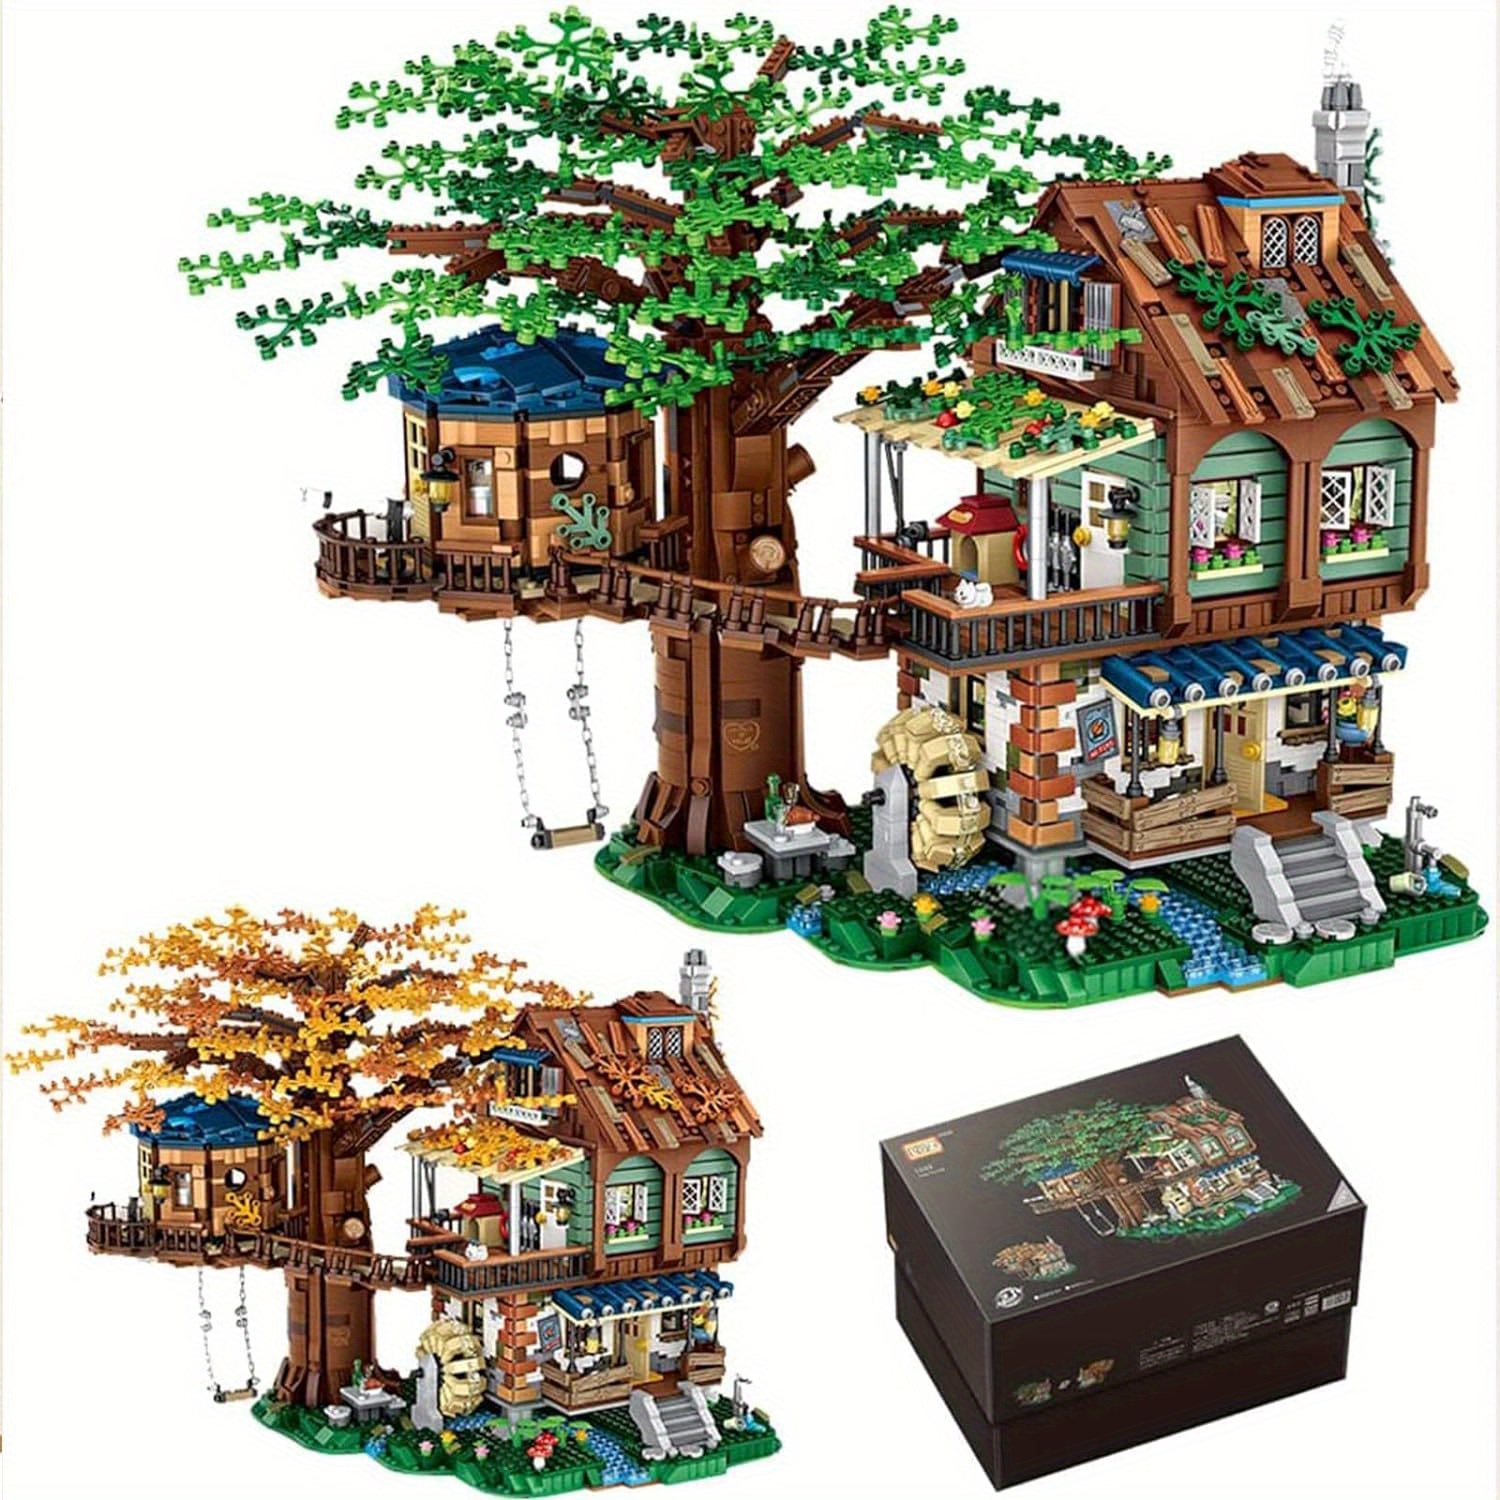 

Idea Tree House Bricks Model Toys Set, Diy Forest House Mini Building Blocks Street View Sets, For Teens Boys Girls/adults Ages 14+ Tree House Display(4761pcs Tree House)